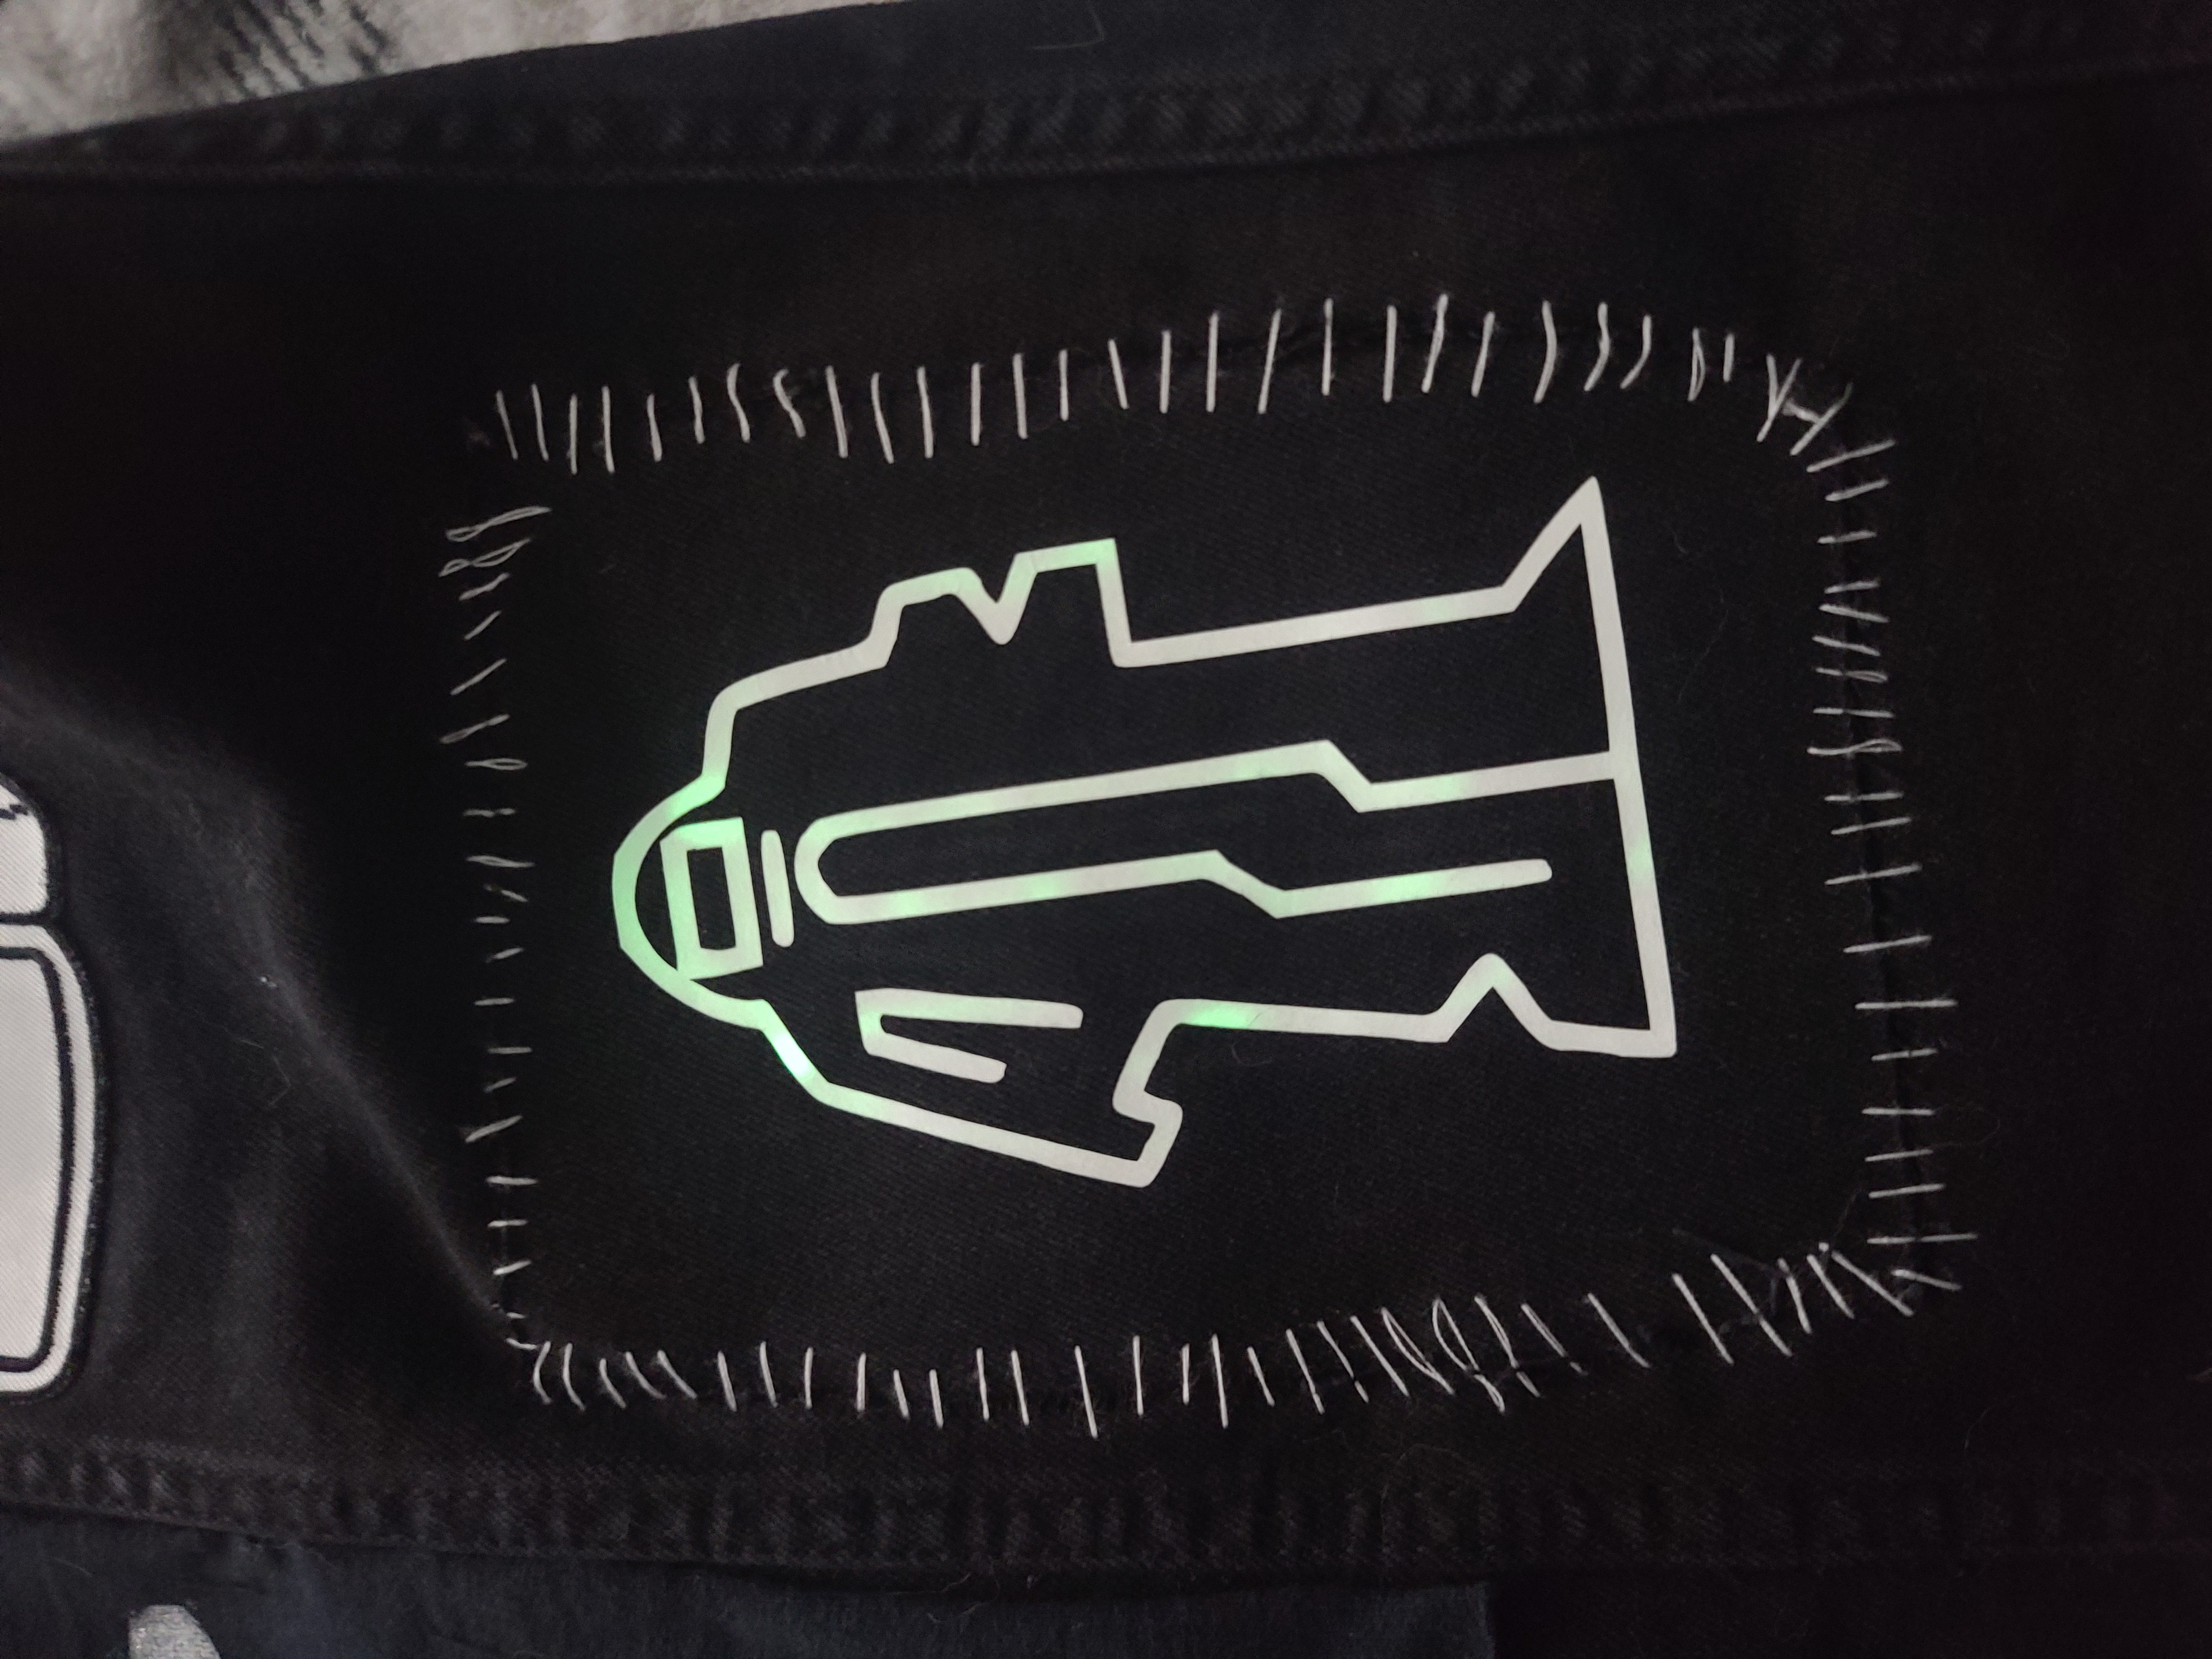 Earthbound Immortal Ccapac Apu Patch. Also glows in the Dark!